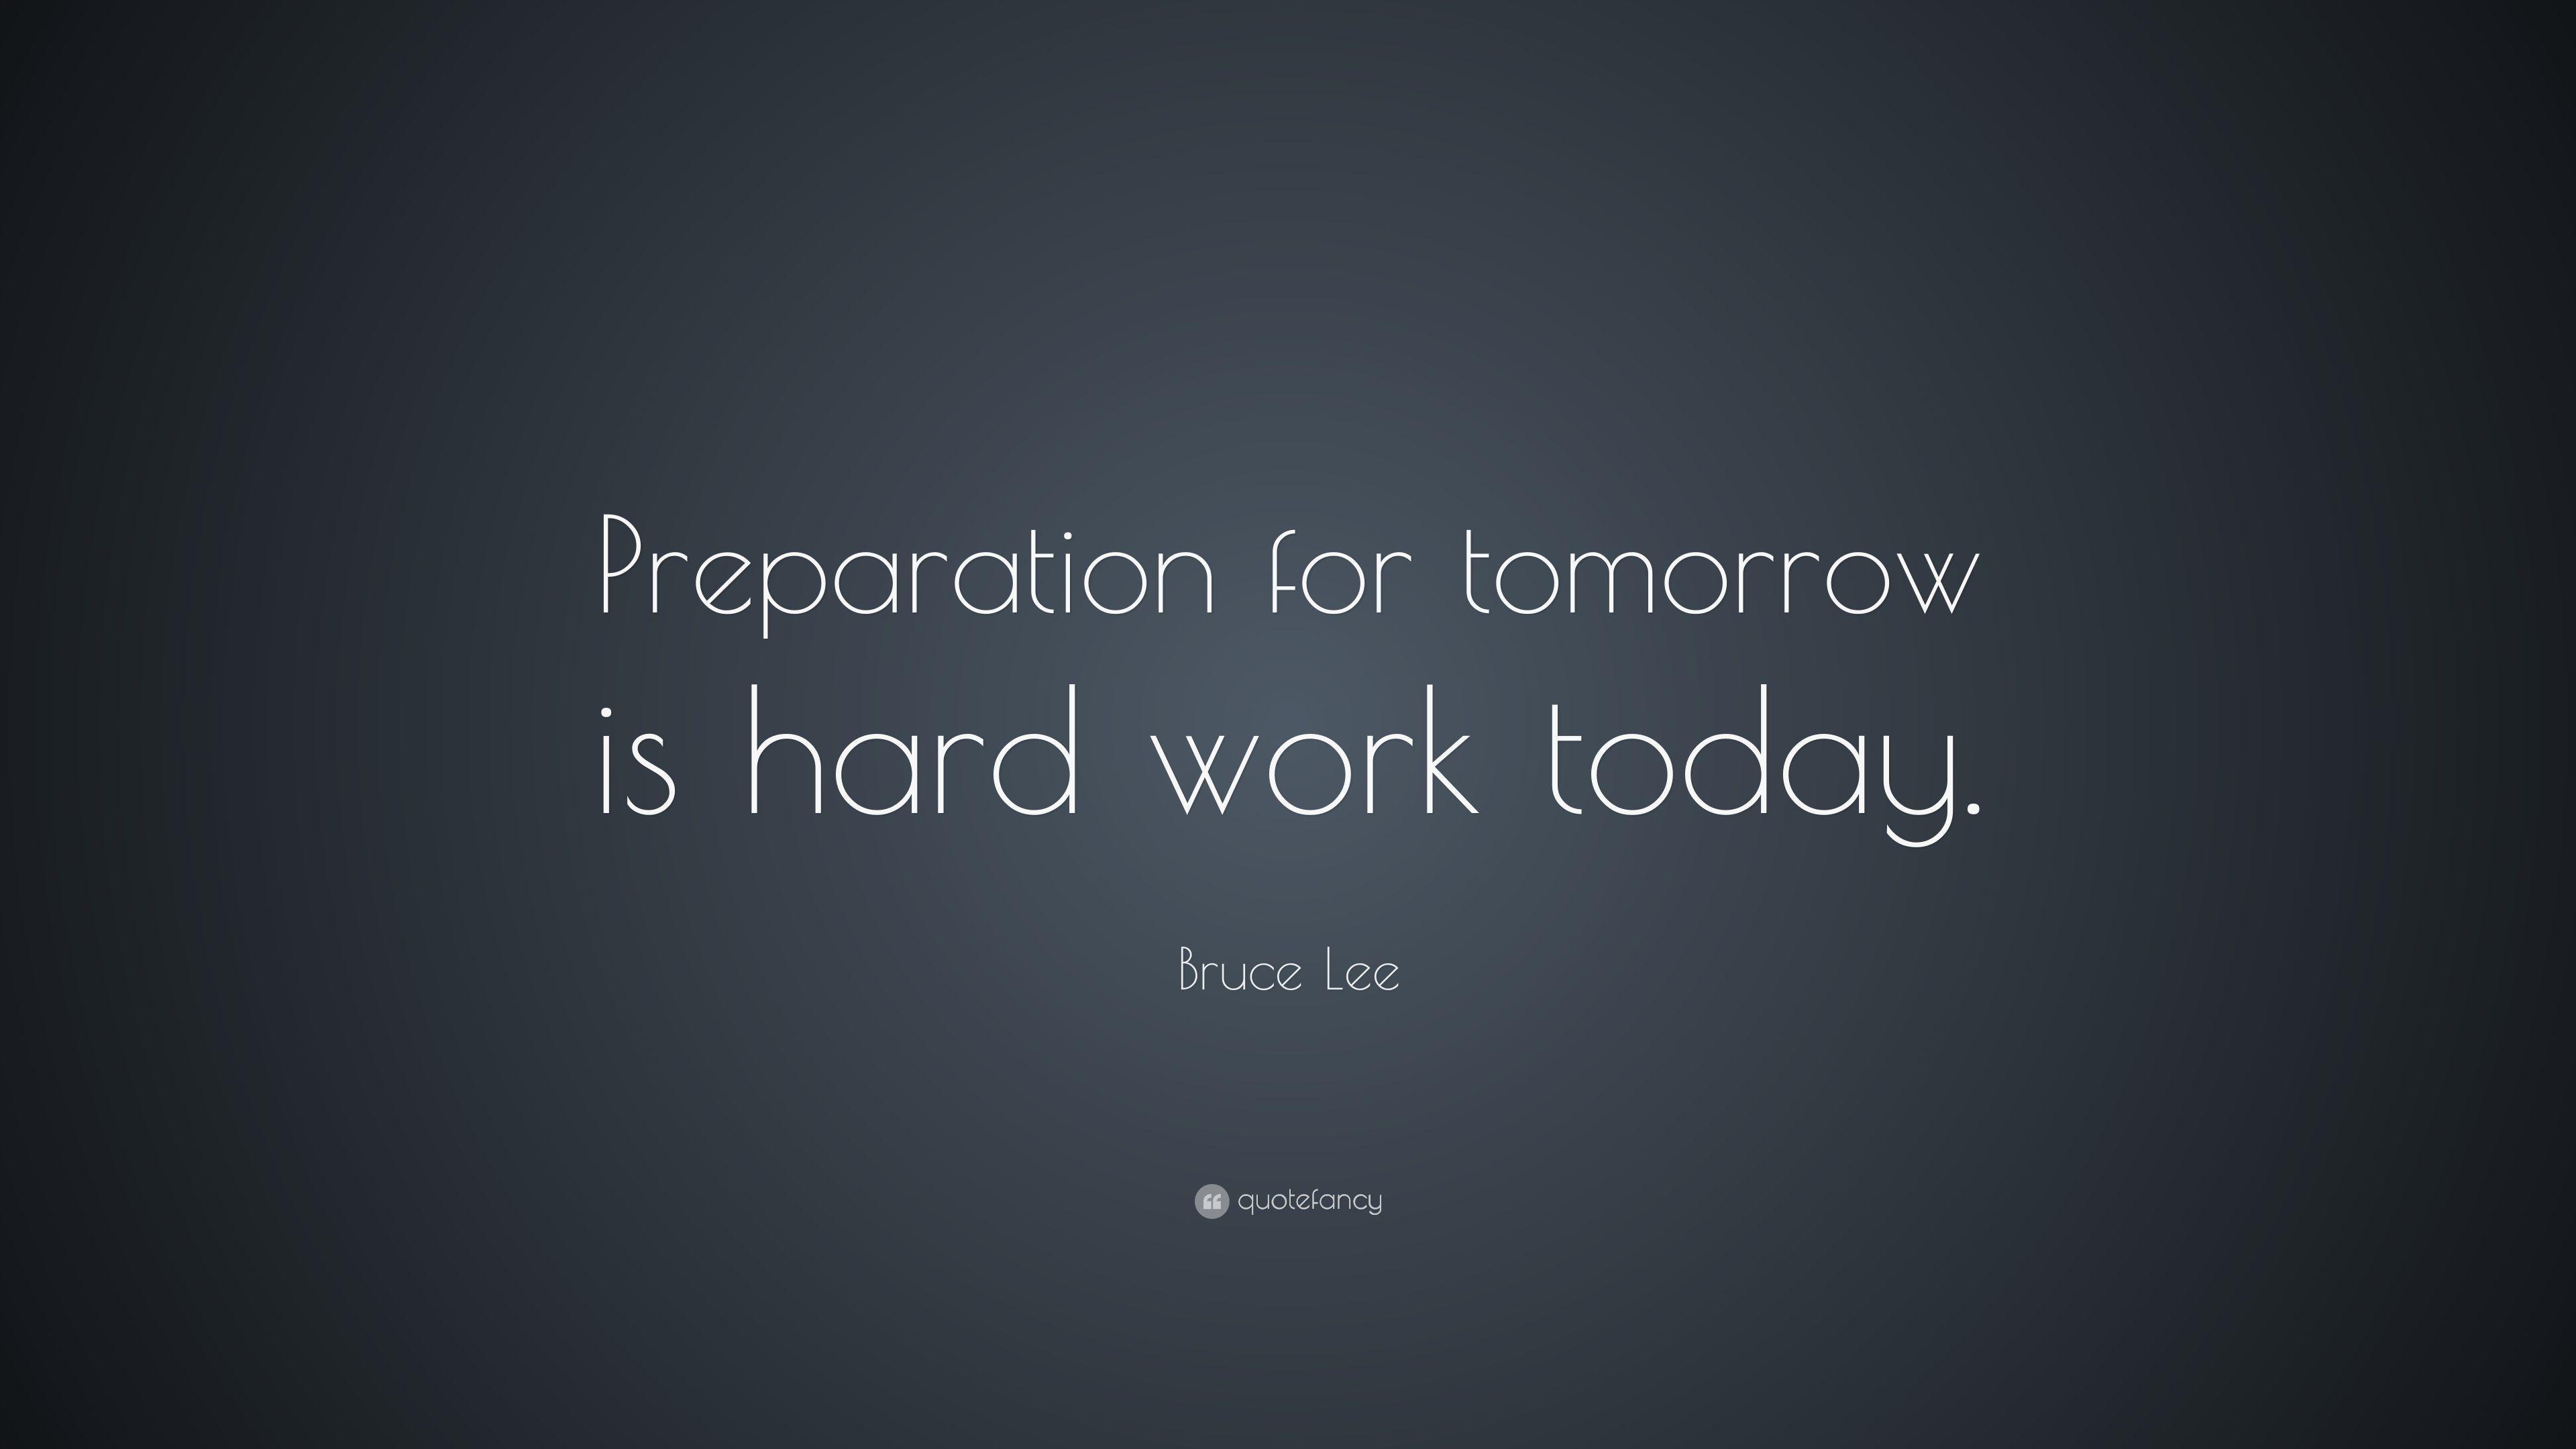 Bruce Lee Quote: “Preparation for tomorrow is hard work today